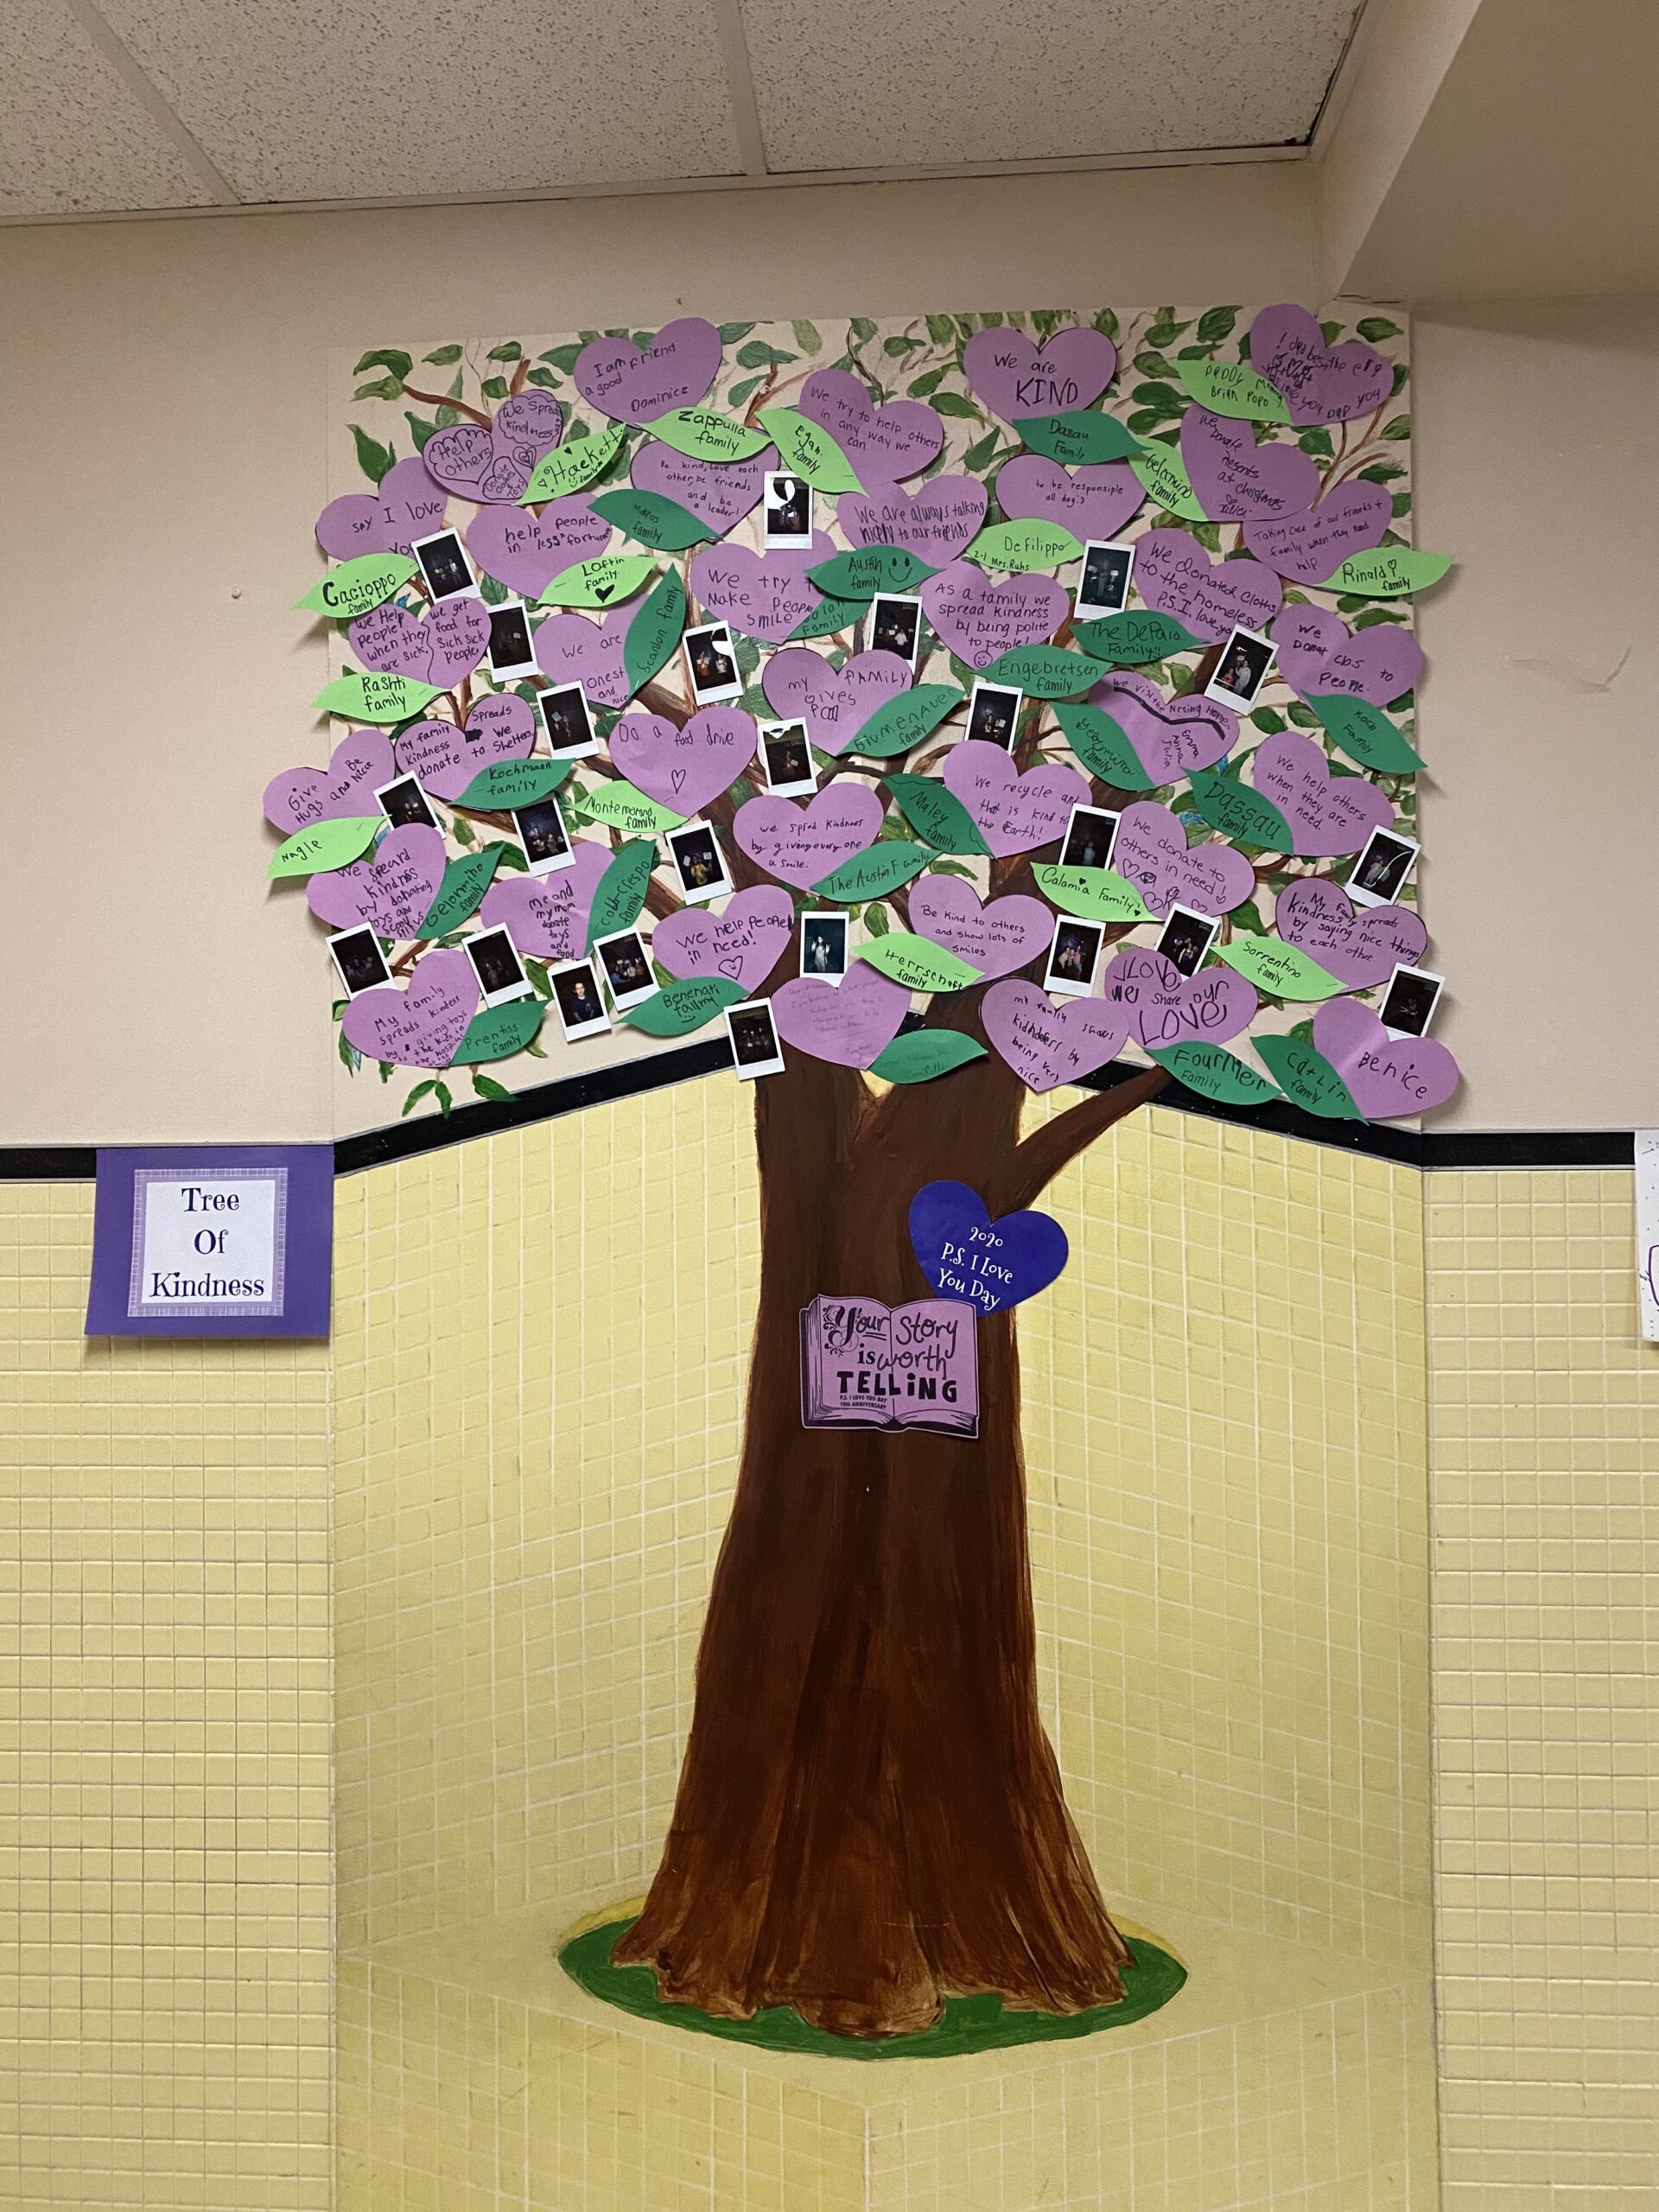 Cayuga Elementary School students created a Tree of Kindness as part of their P.S. I Love You Day celebrations in 2020. COURTESY CAYUGA ELEMENTARY SCHOOL